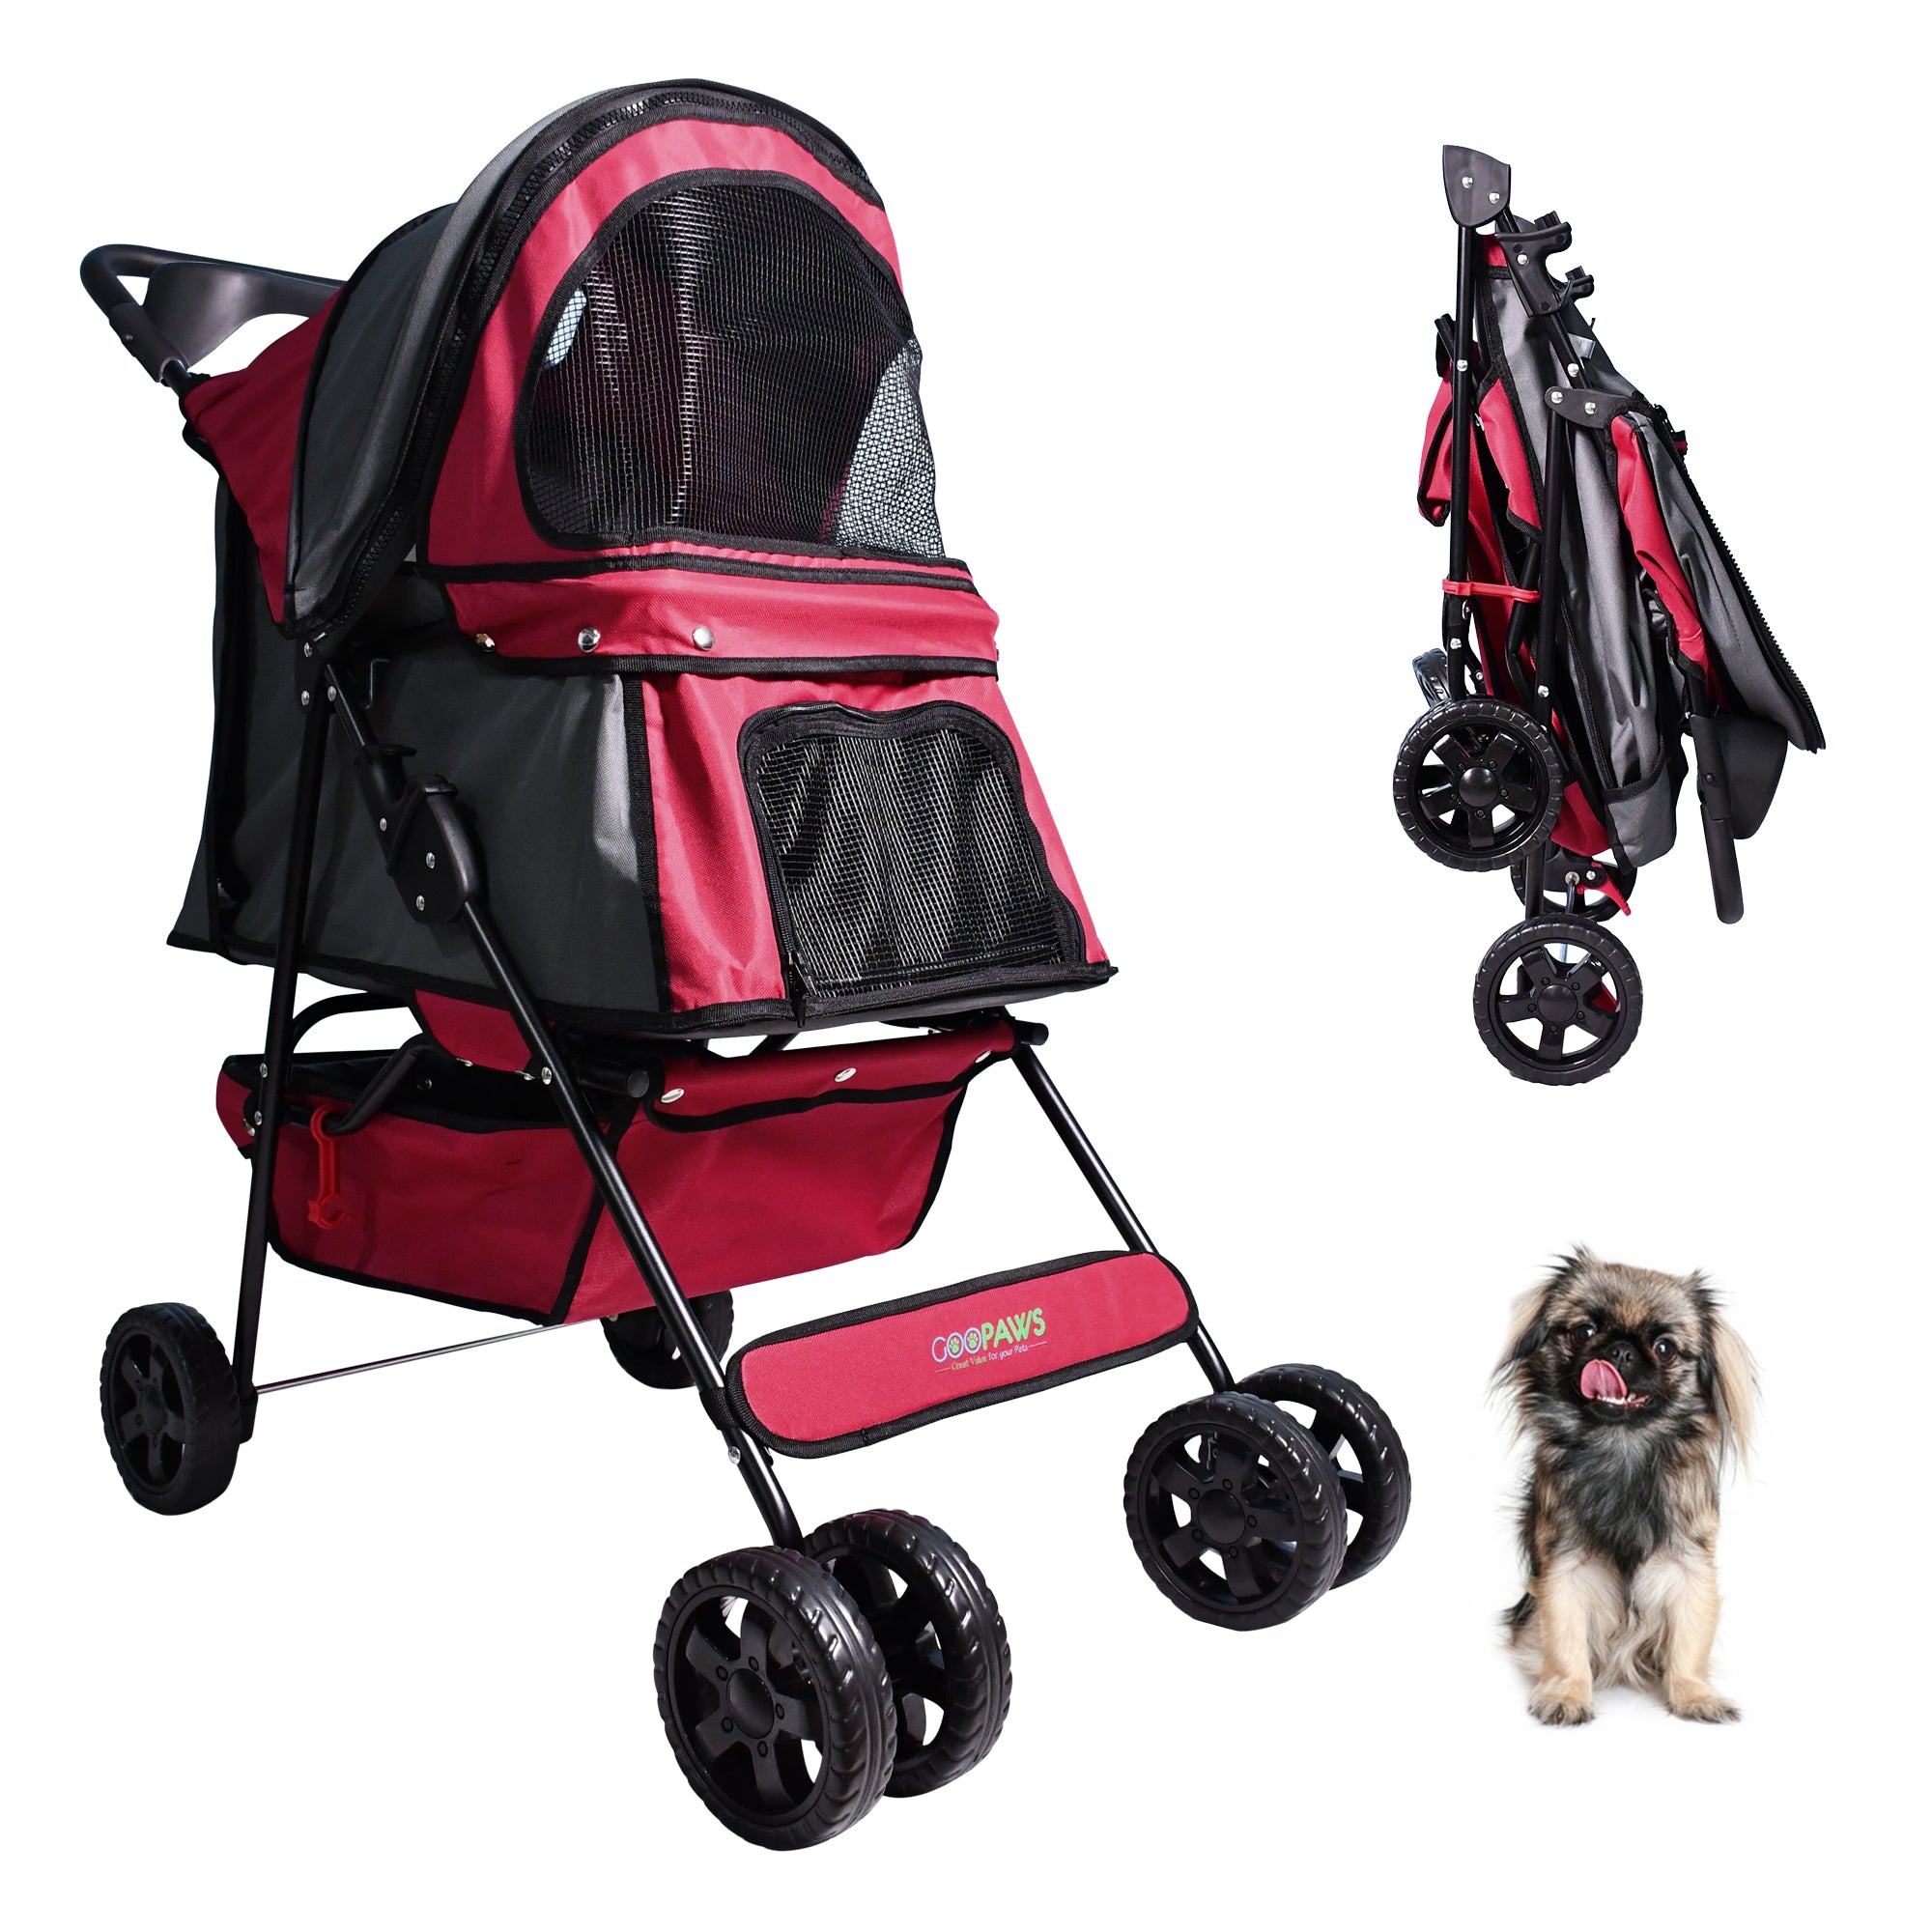 Jespet 4-Wheel Promenade Pet Stroller for Small Dogs Cats, Red, 36''